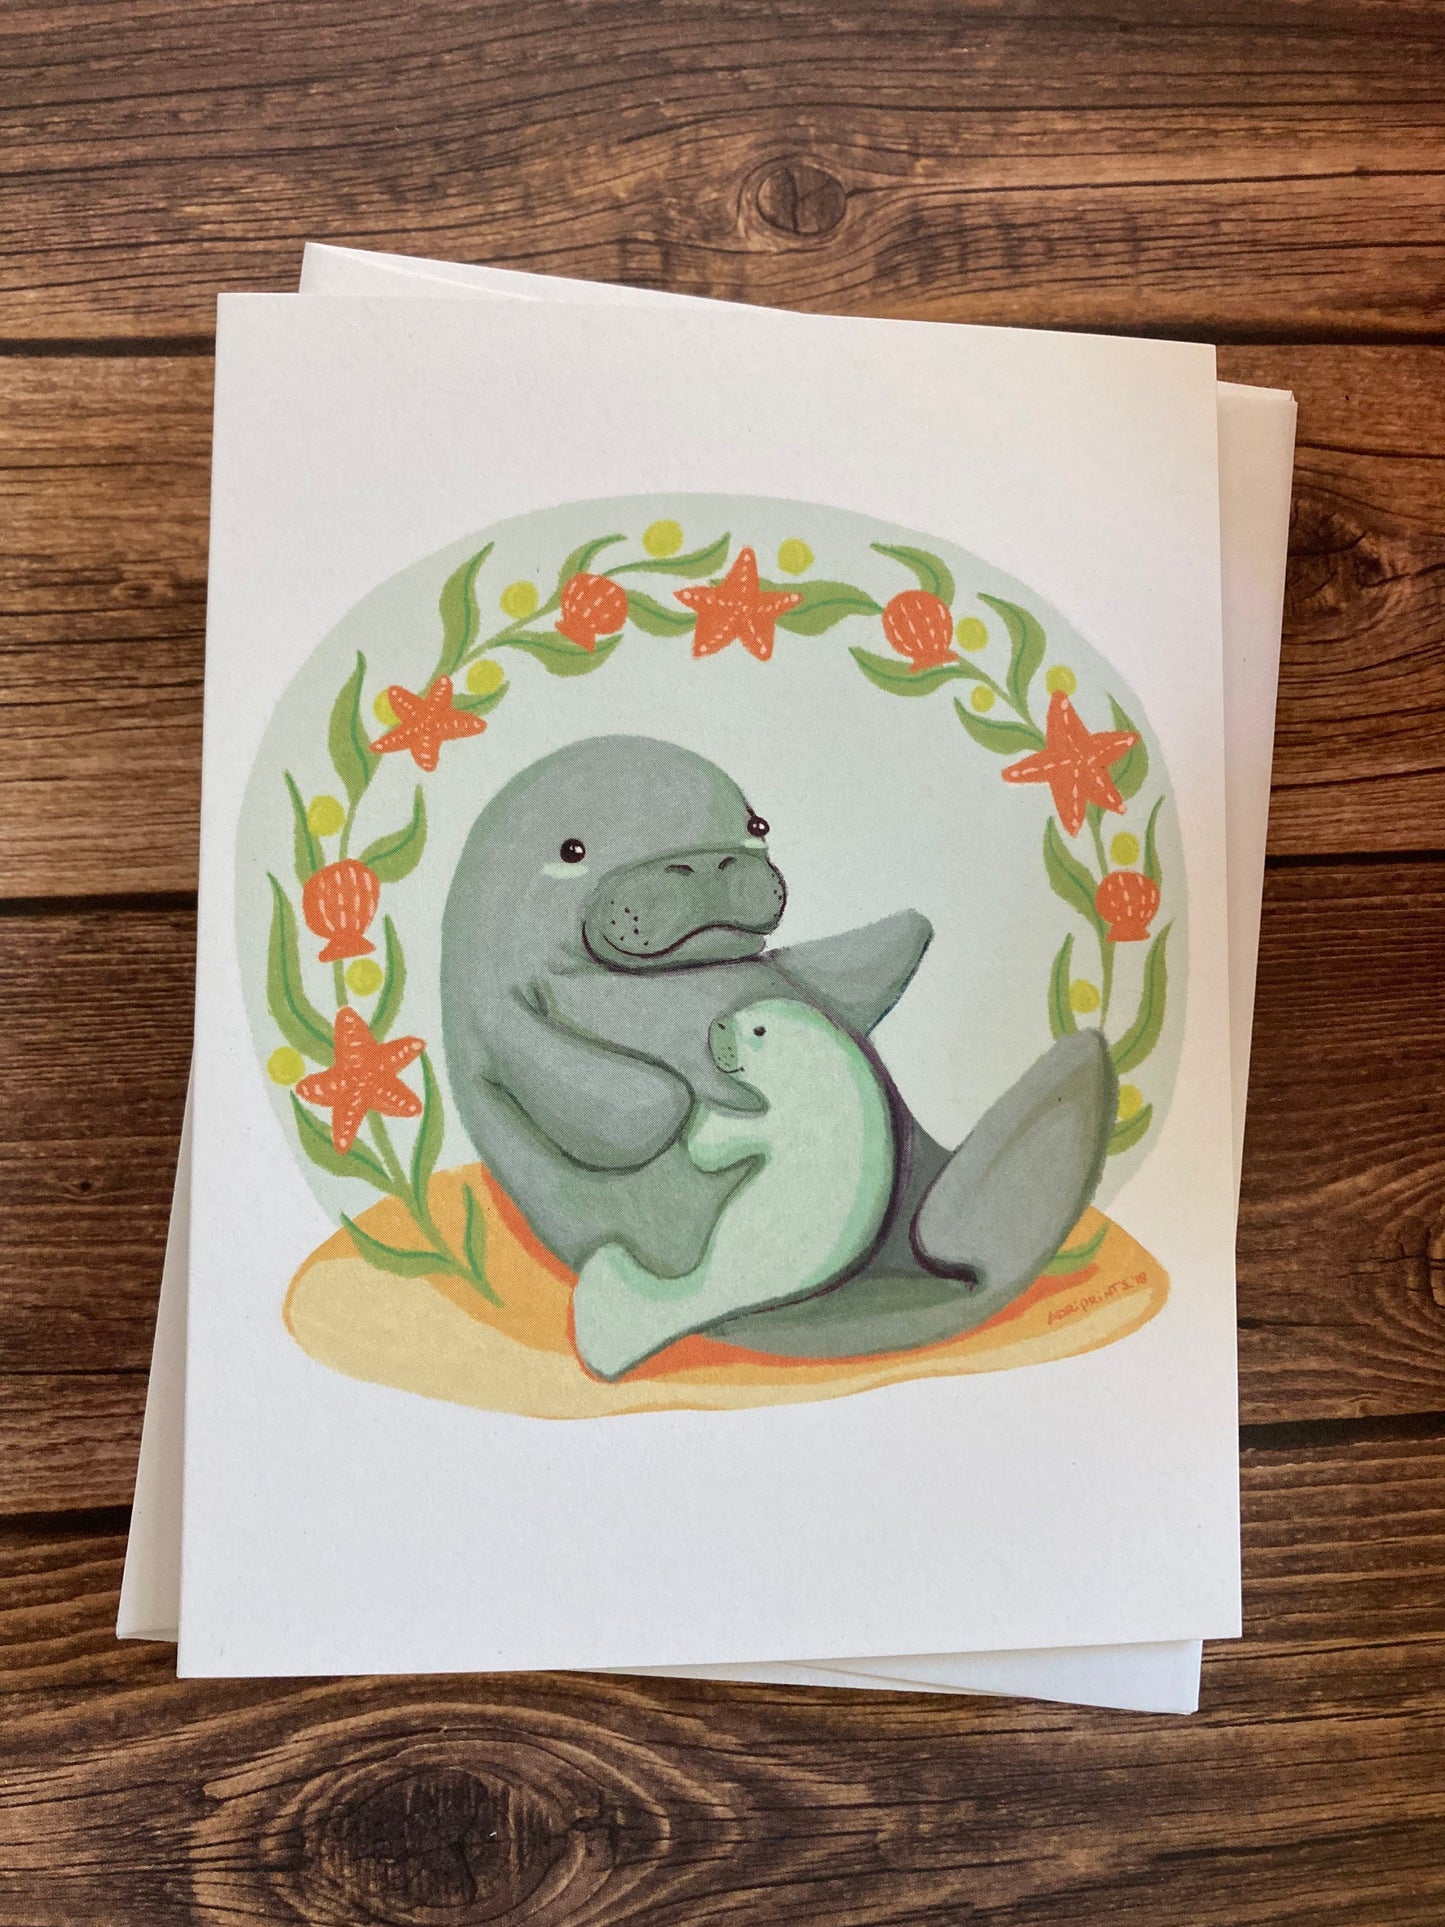 LOVE - Manatee Mama - Greeting Card for new parents, Mother's Day, Father's Day, new families, eco-friendly notecards by Adriana Bergstrom